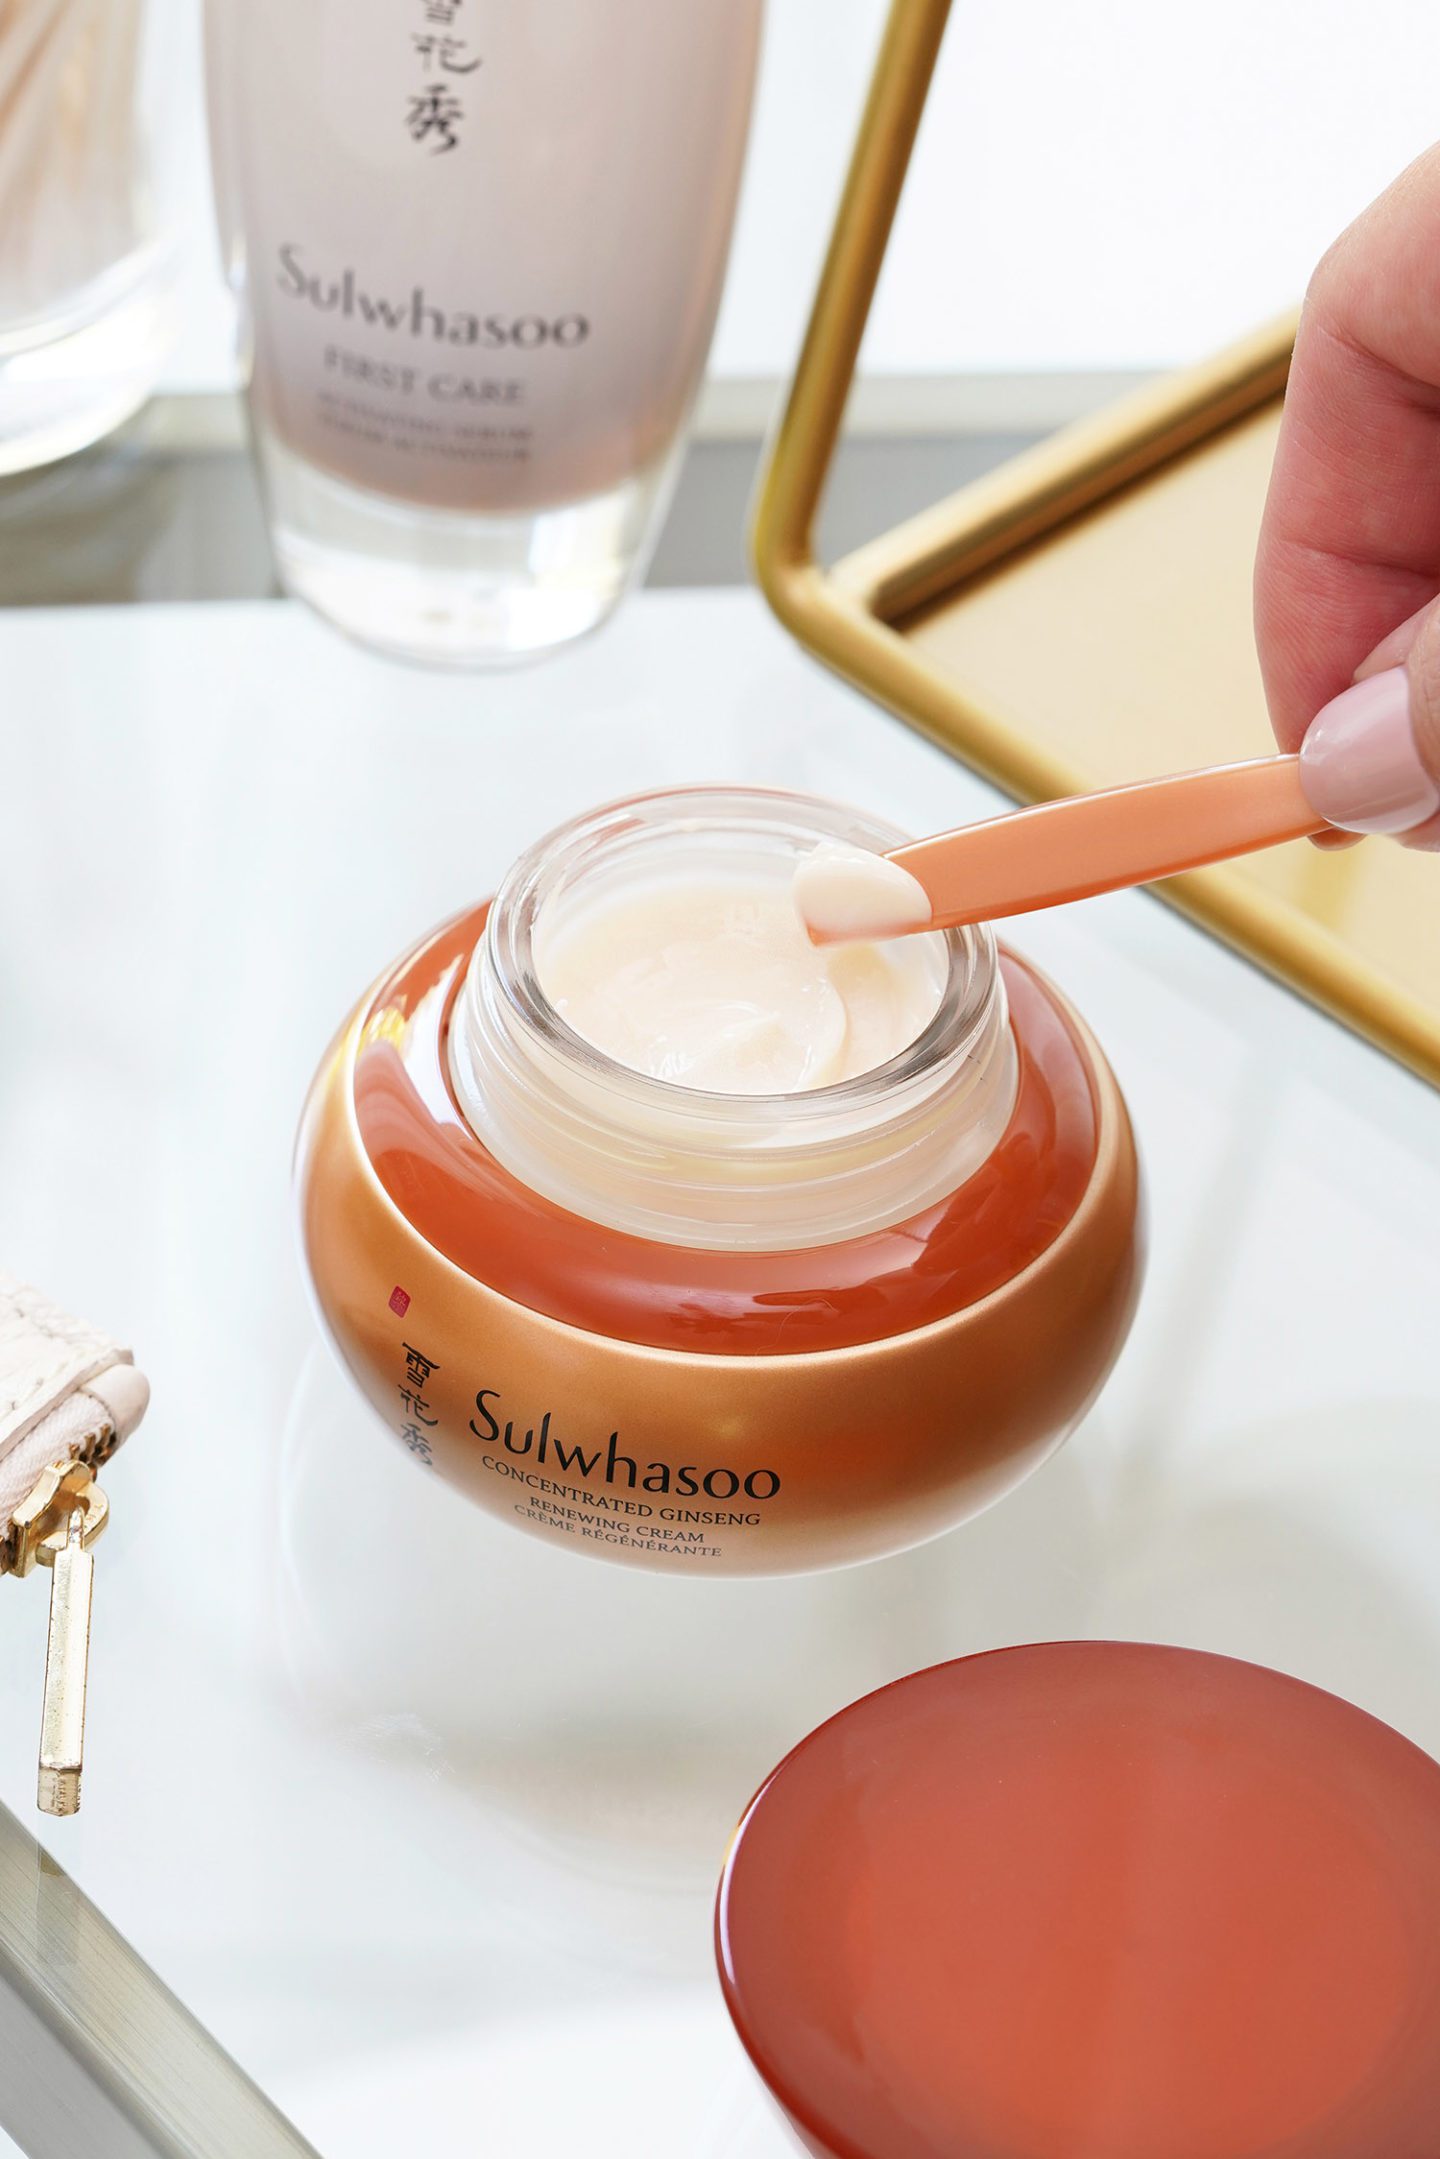 Sulwhasoo Concentrated Ginseng Renewing Cream texture